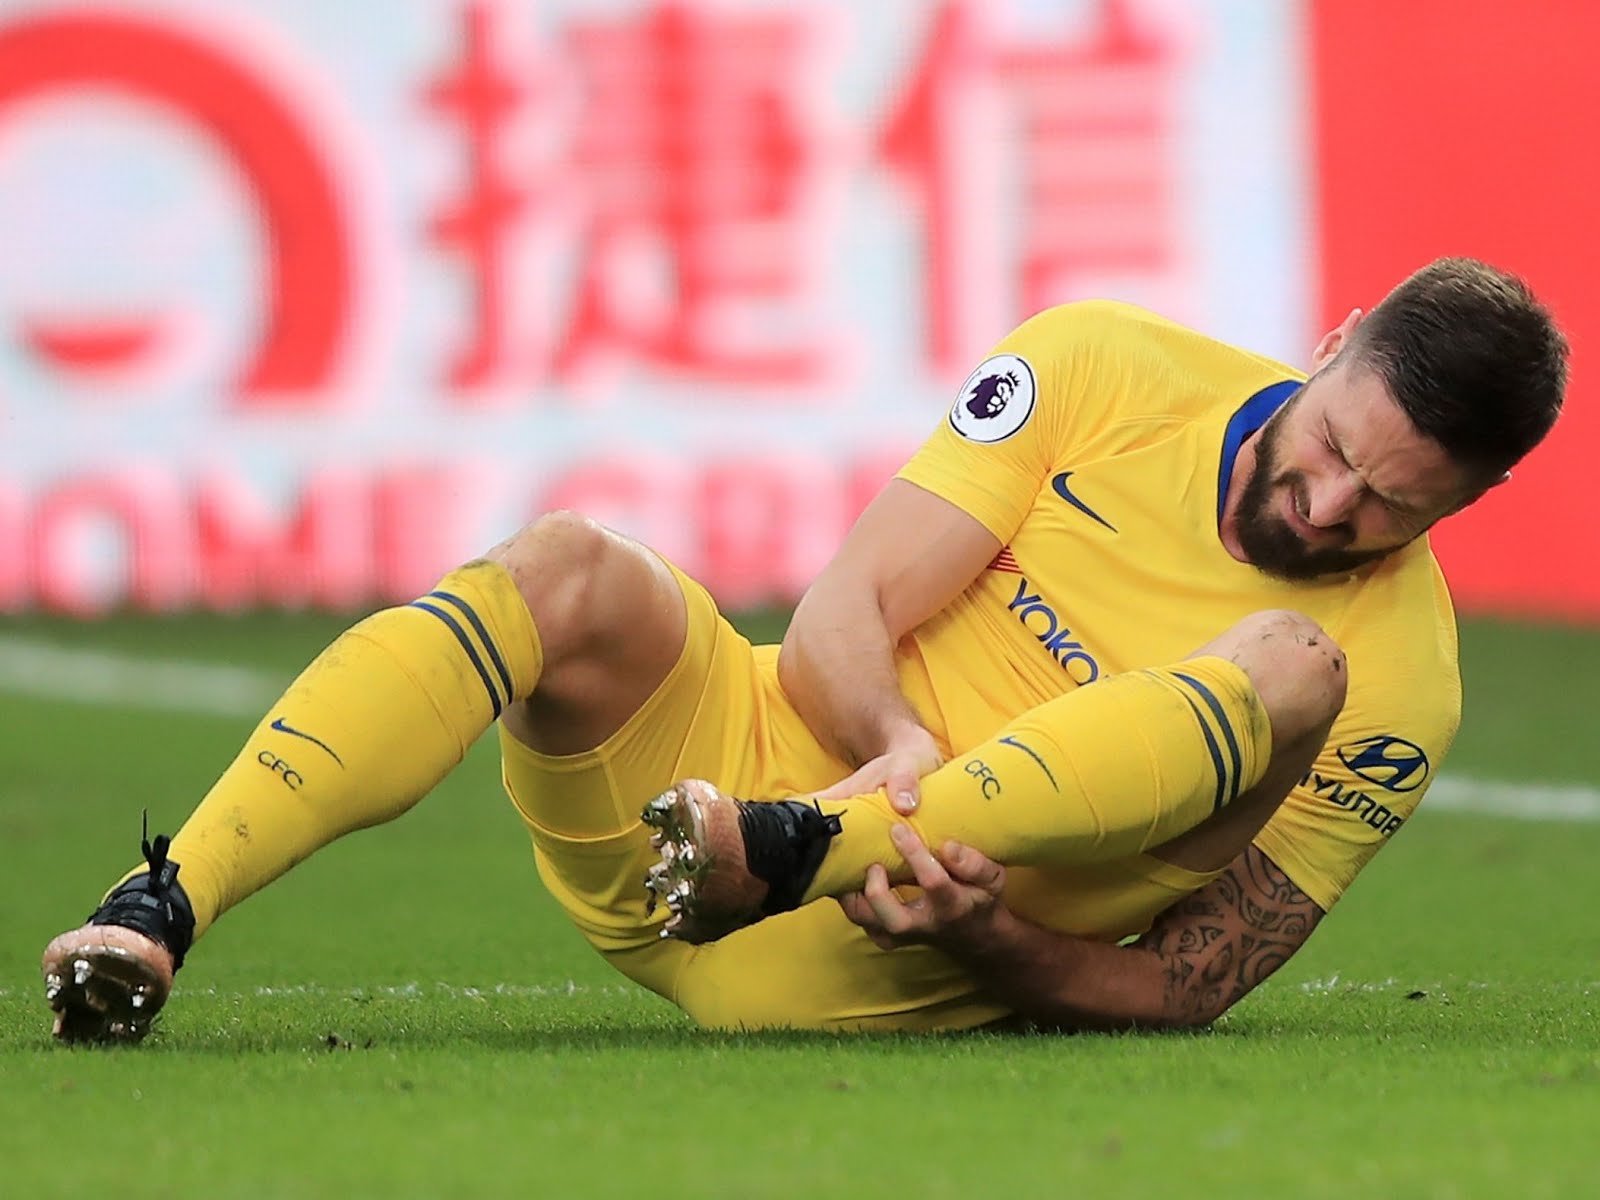 Crystal Palace Vs Chelsea - Giroud Injury , HD Wallpaper & Backgrounds